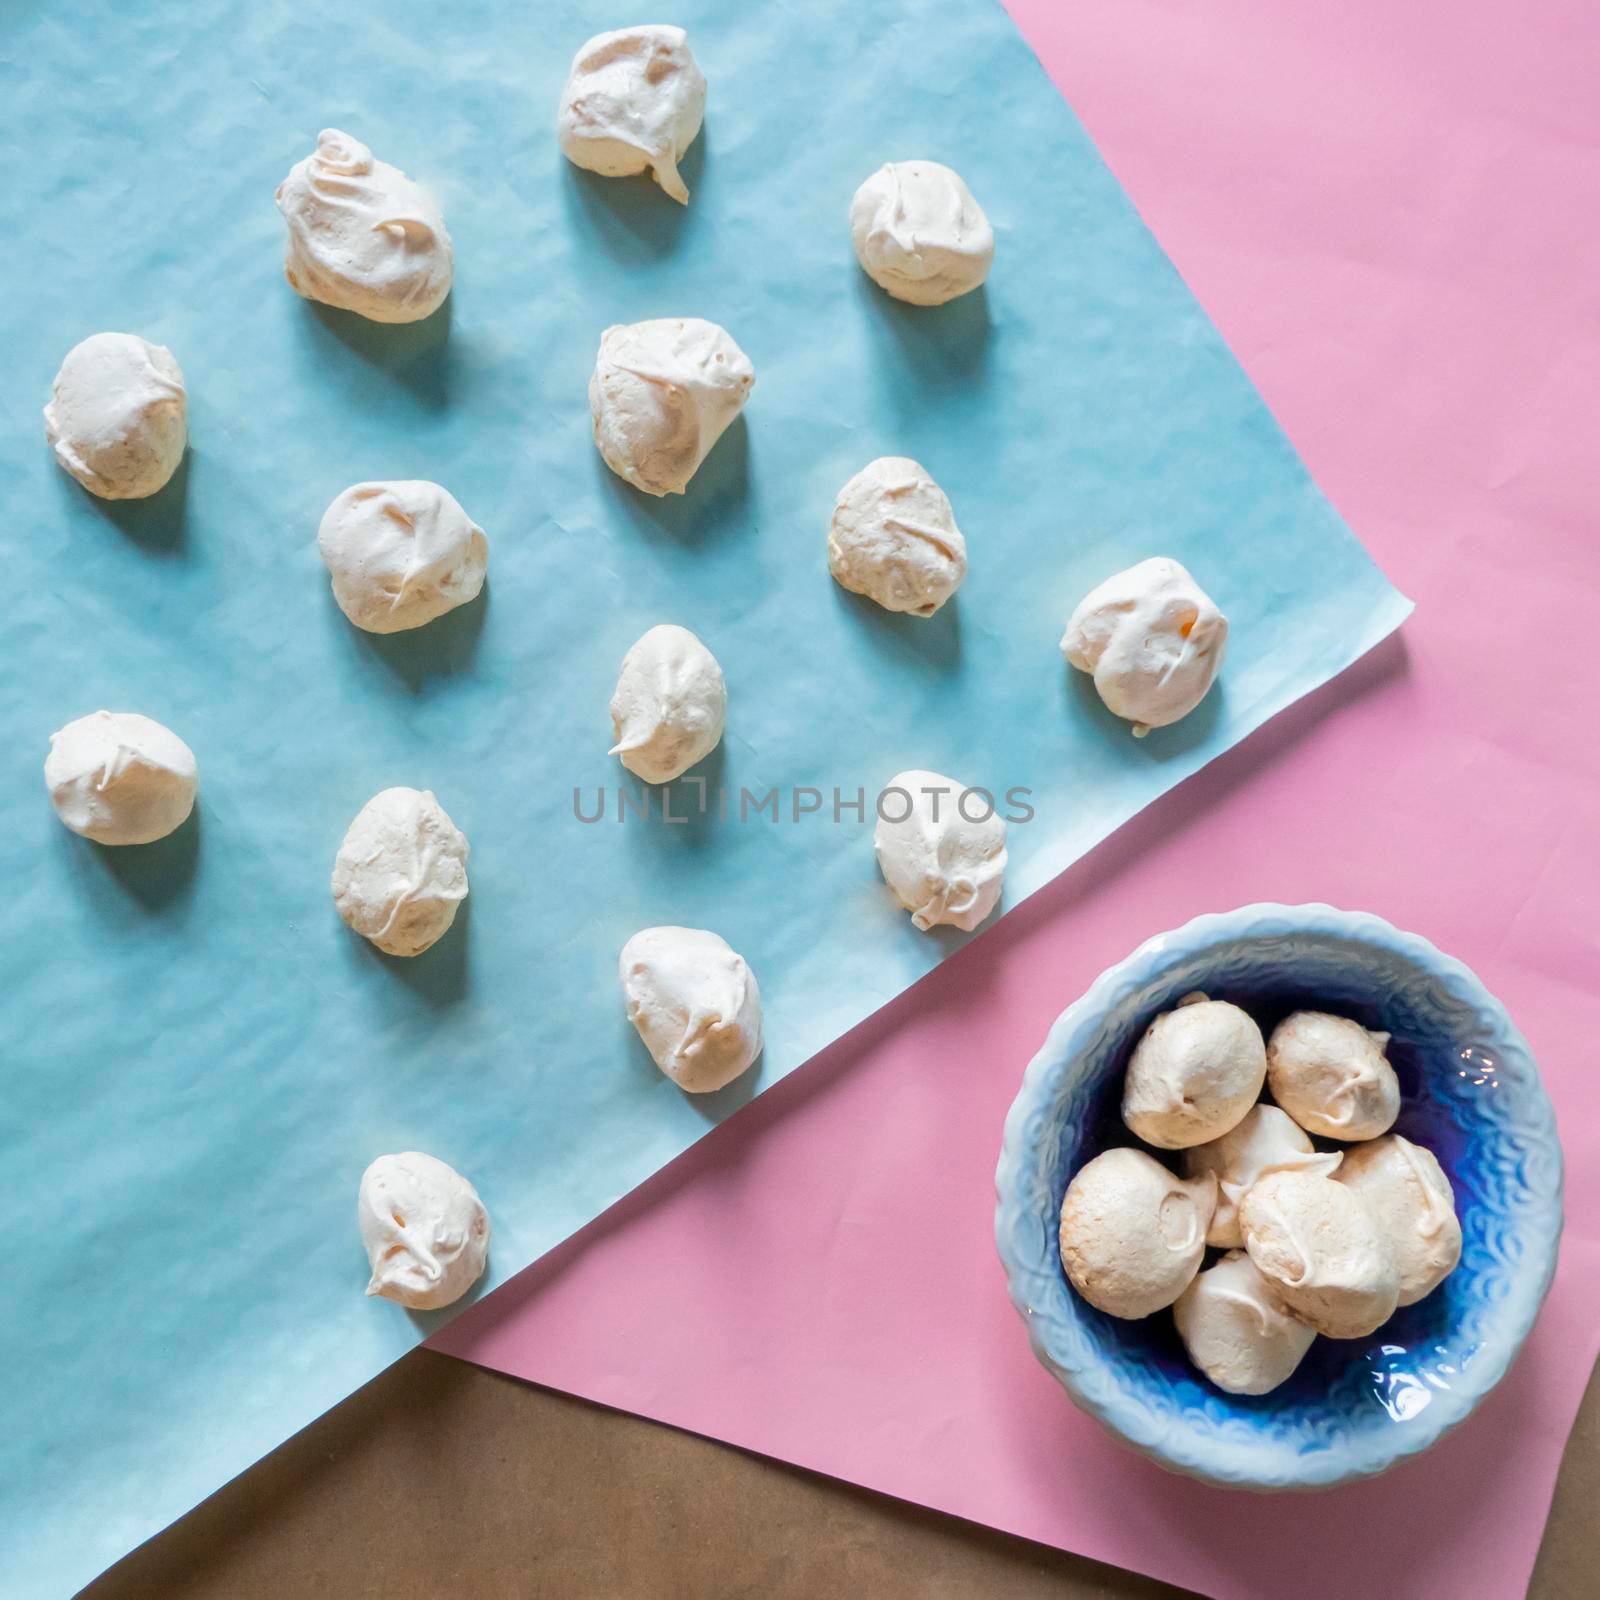 Homemade french milk-colored meringues on bluet paper. flatley composition: delicious homemade meringues on craft paper